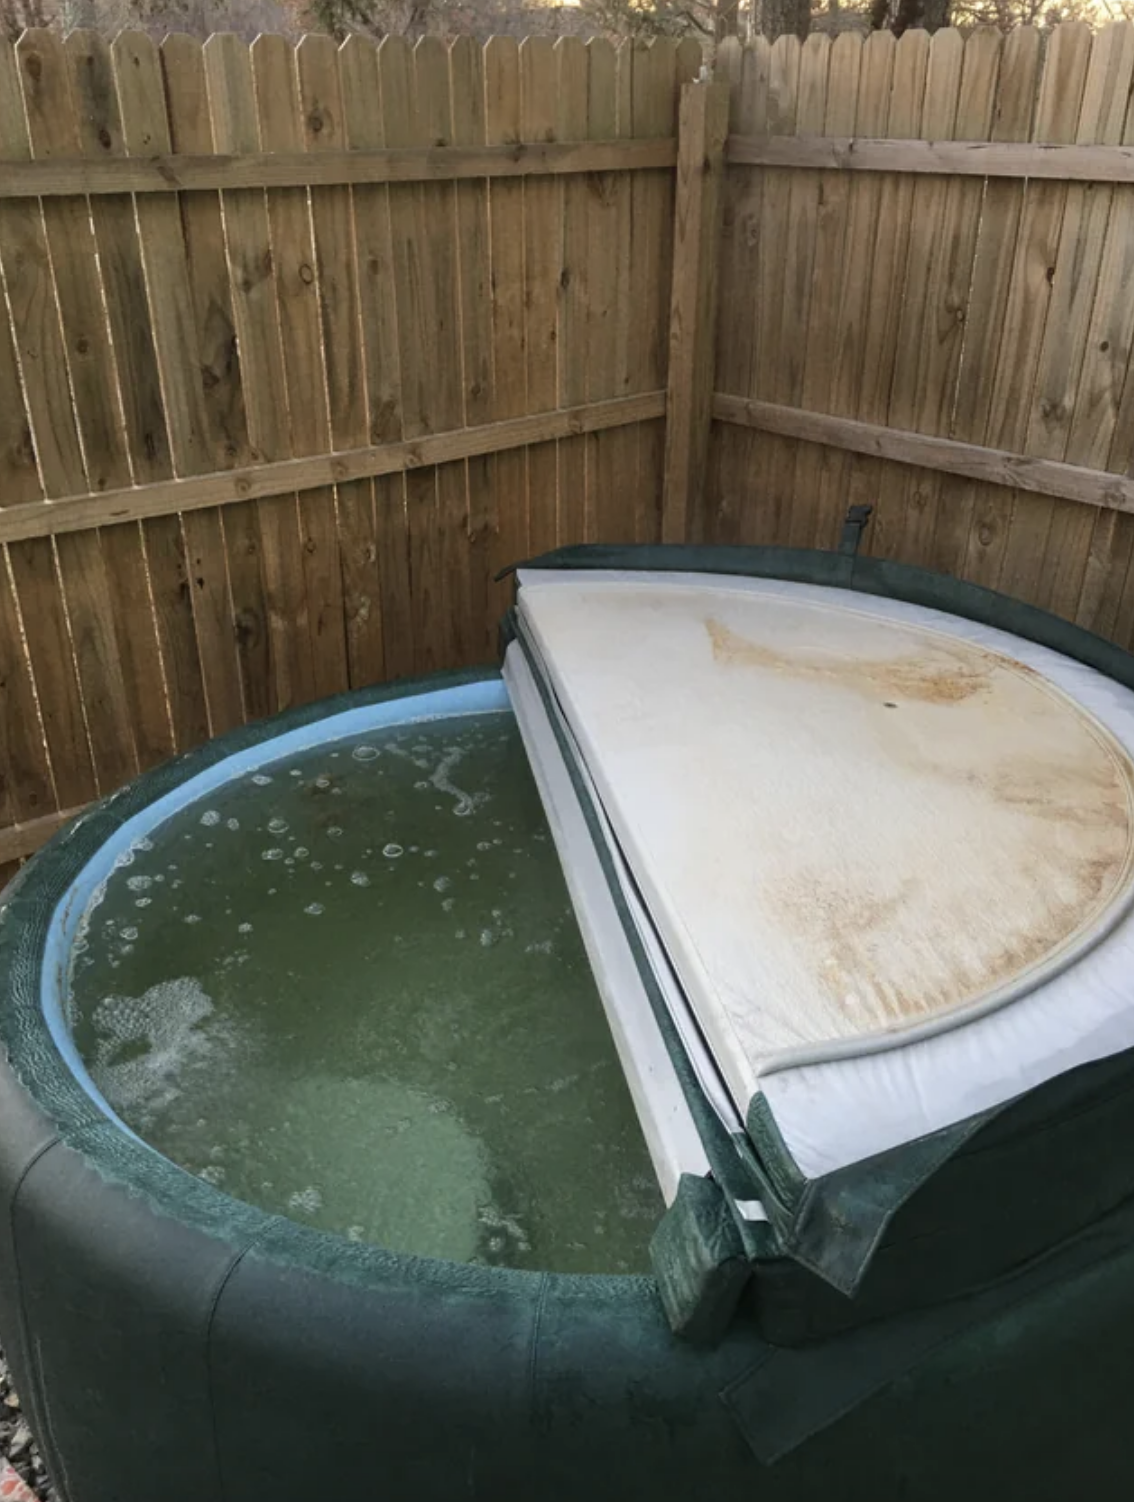 The cover of the hot tub is pulled back to reveal the bottom of the cover and the inside of the water are covered with dirt